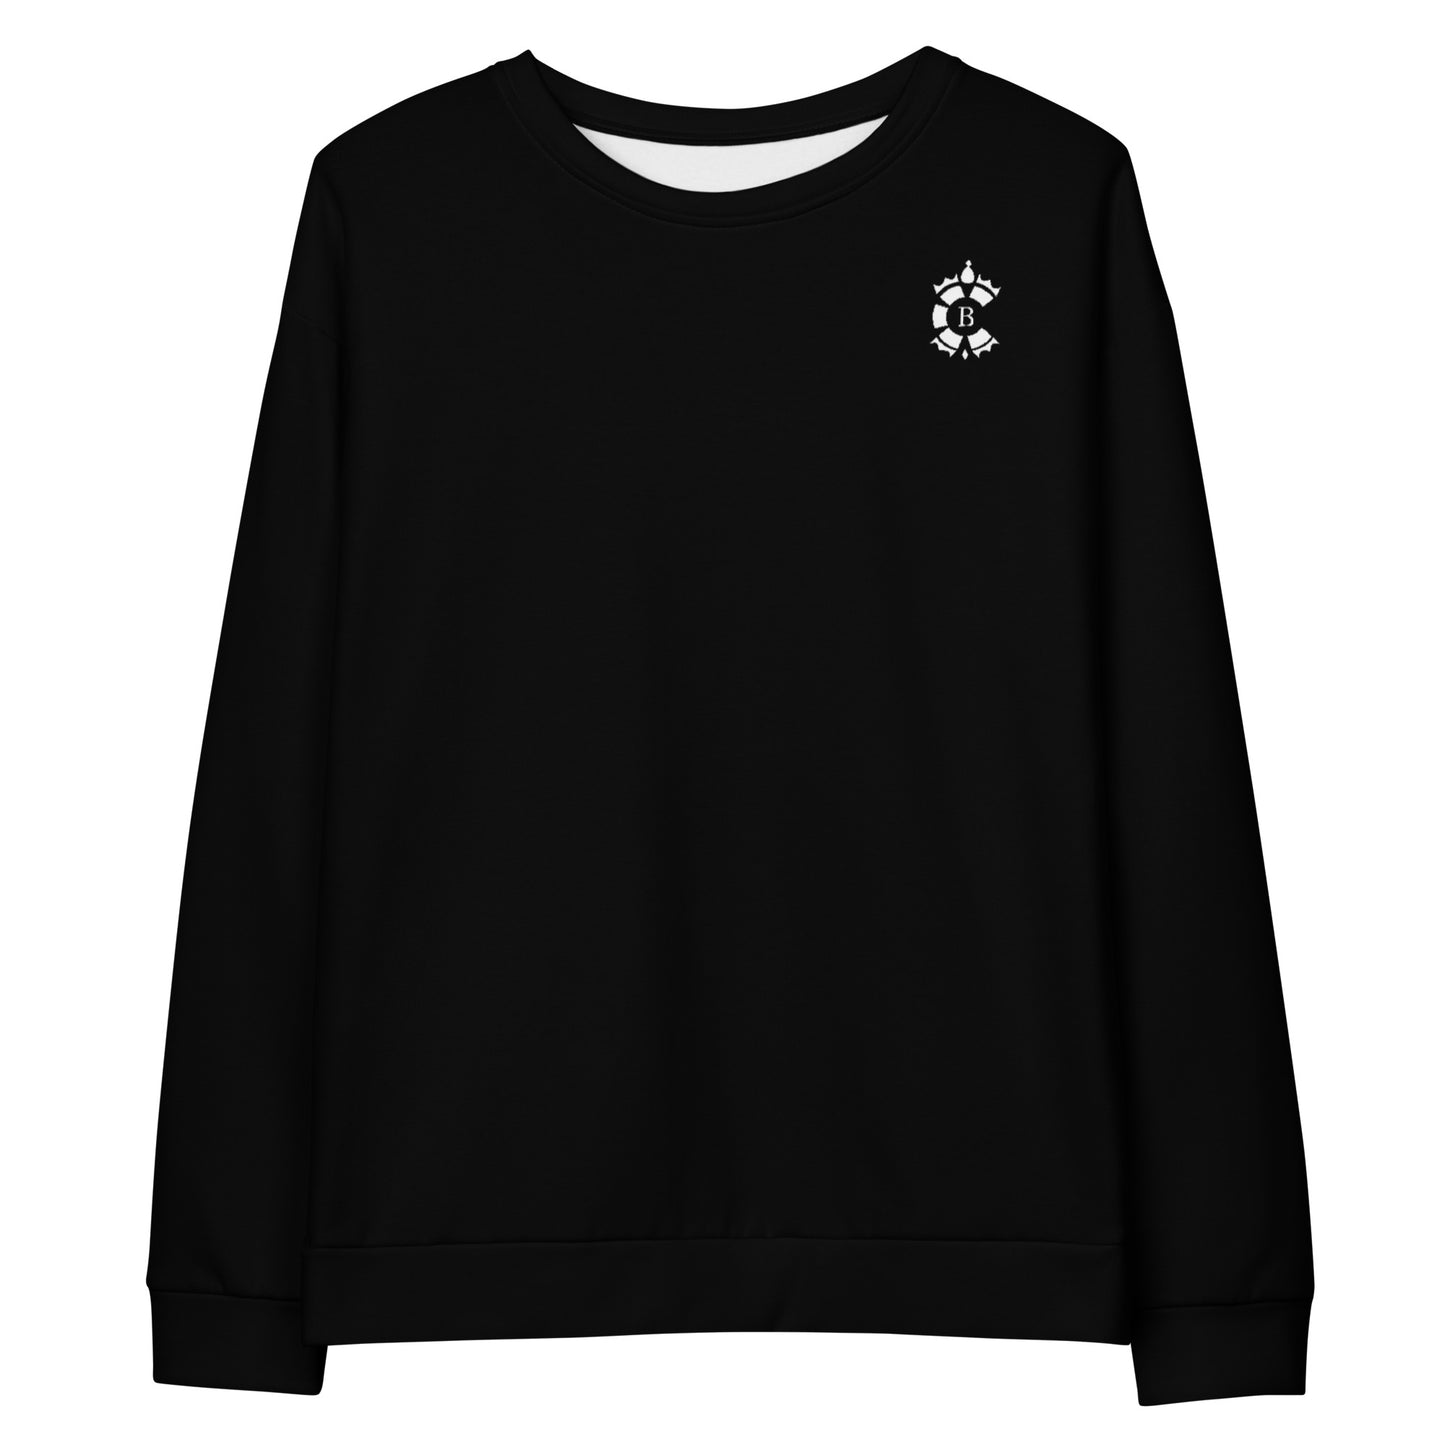 CONTRABRANDED Logo Sweater White on Black